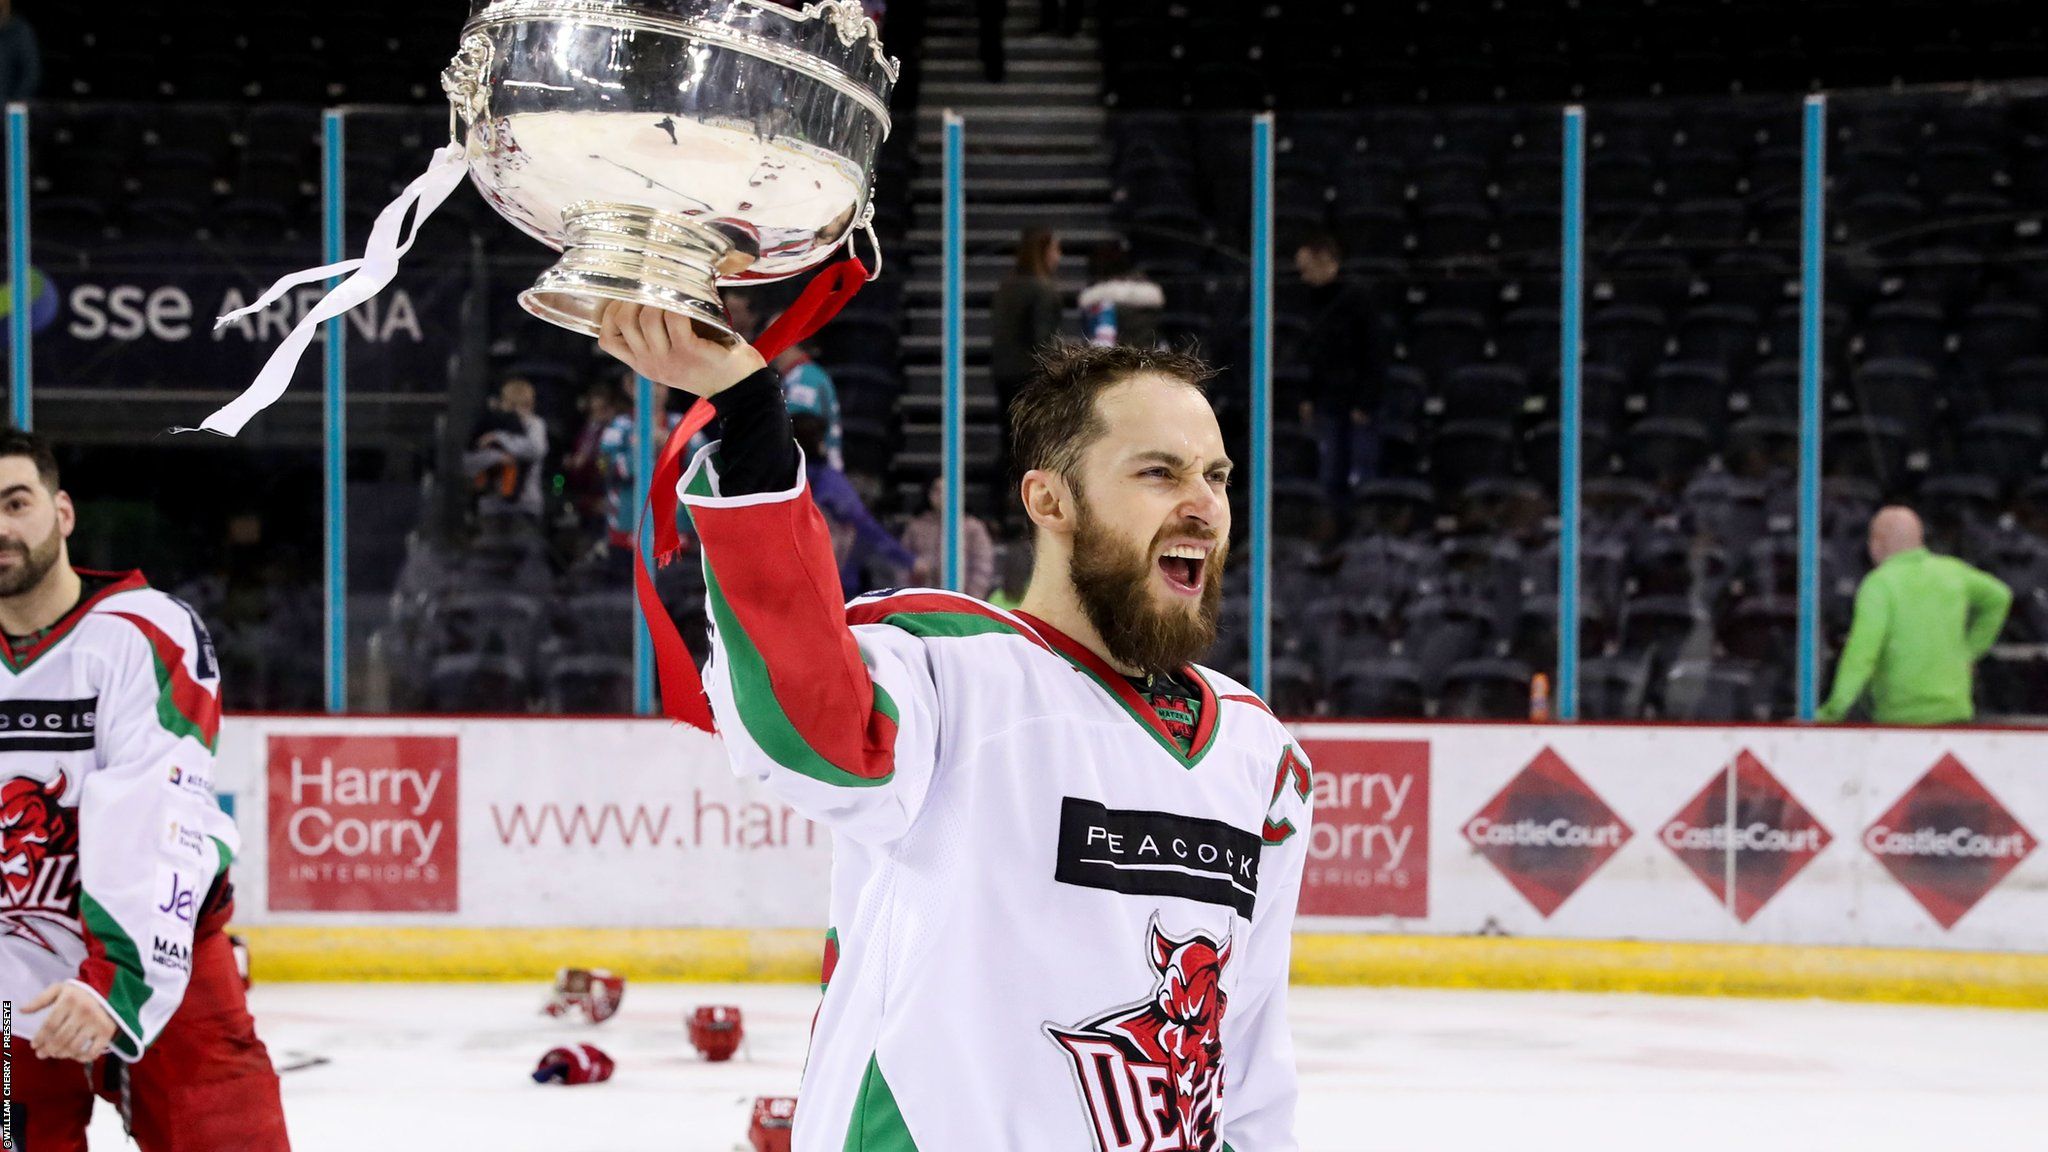 Cardiff Devils team celebrate with trophy